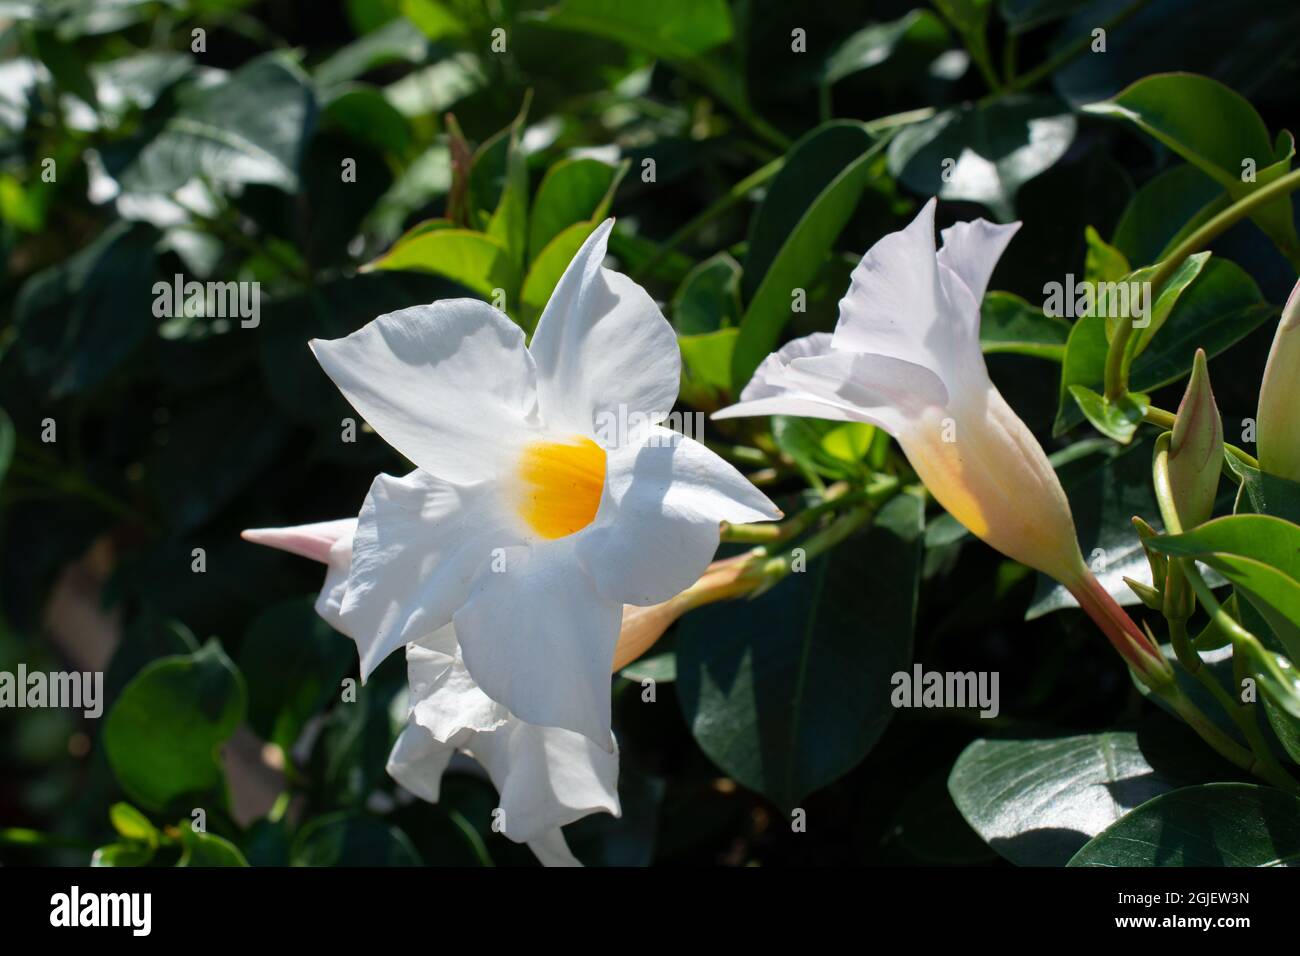 Closeup shot of mandevilla rocktrumpet flowers with white petals and yellow center blooming Stock Photo